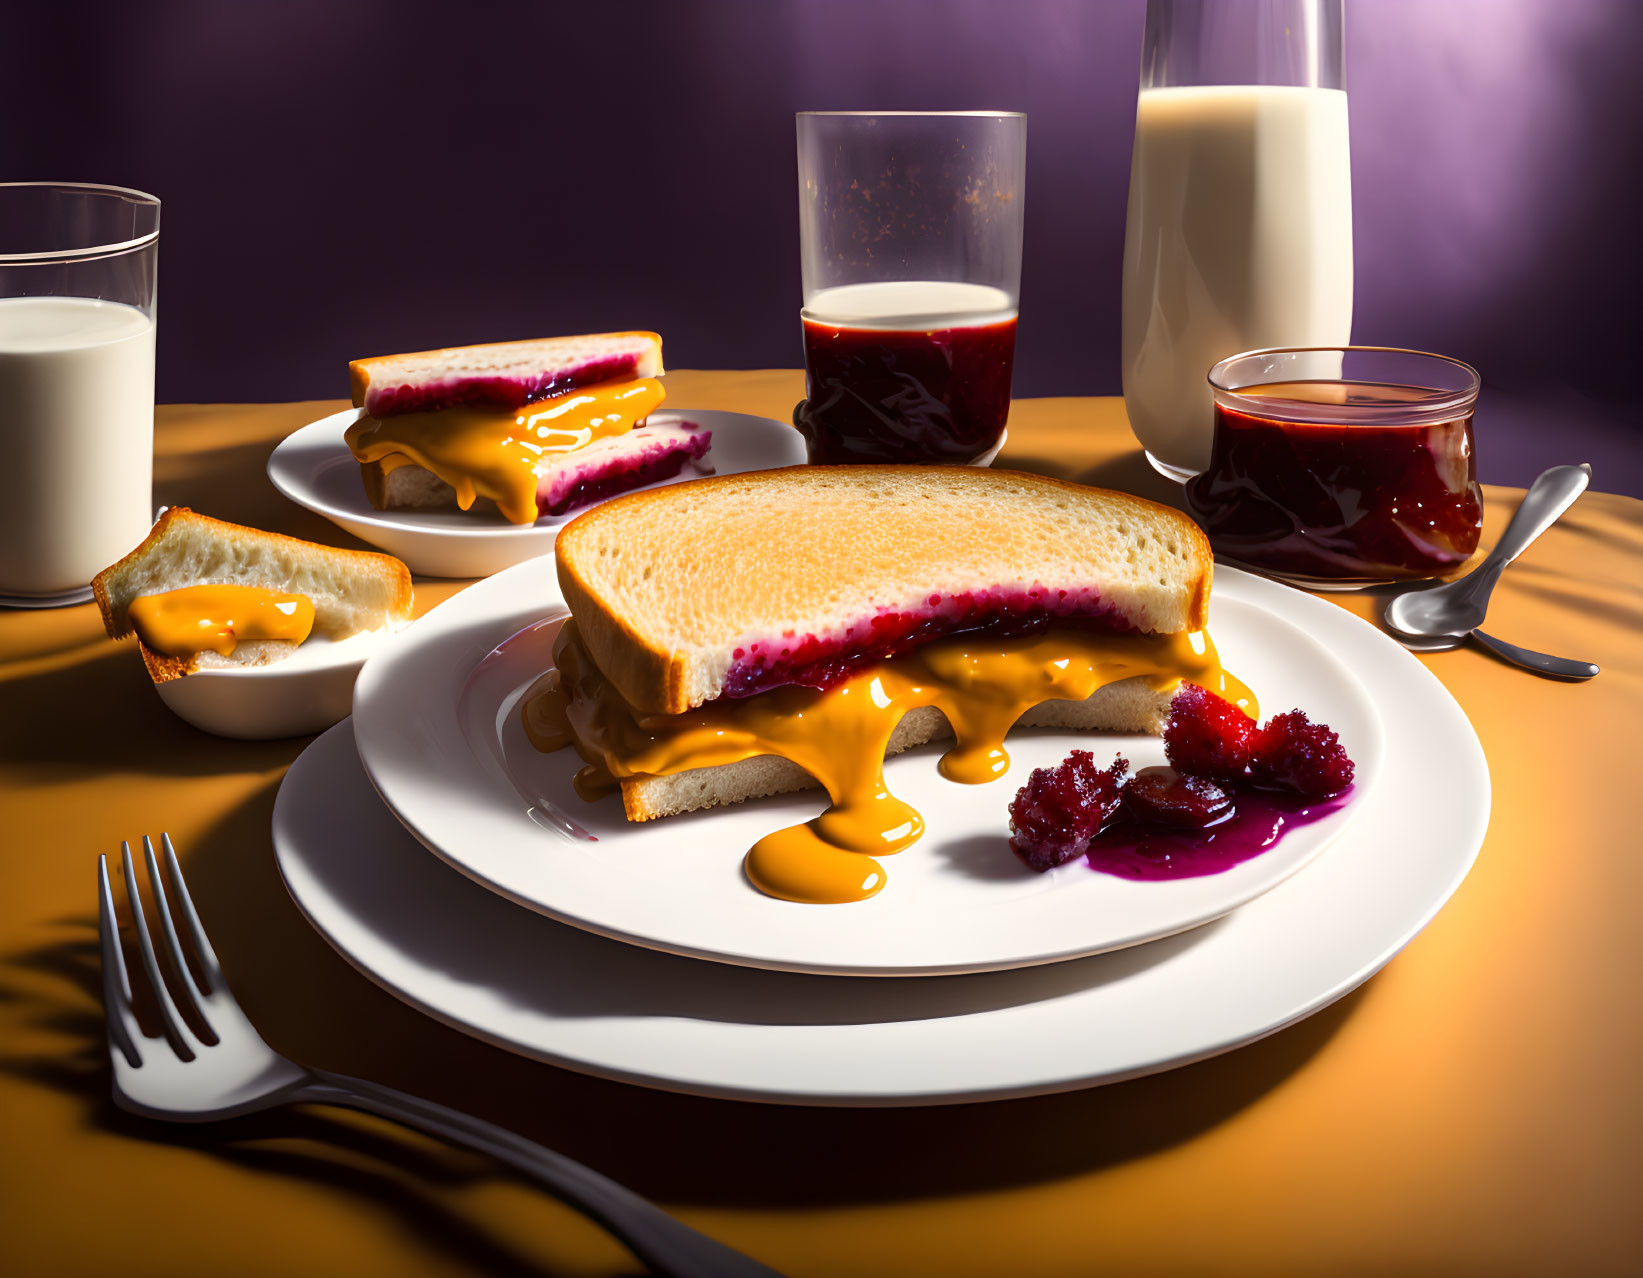 Melting cheese grilled sandwich with berry jam, glass of milk on warm-lit table